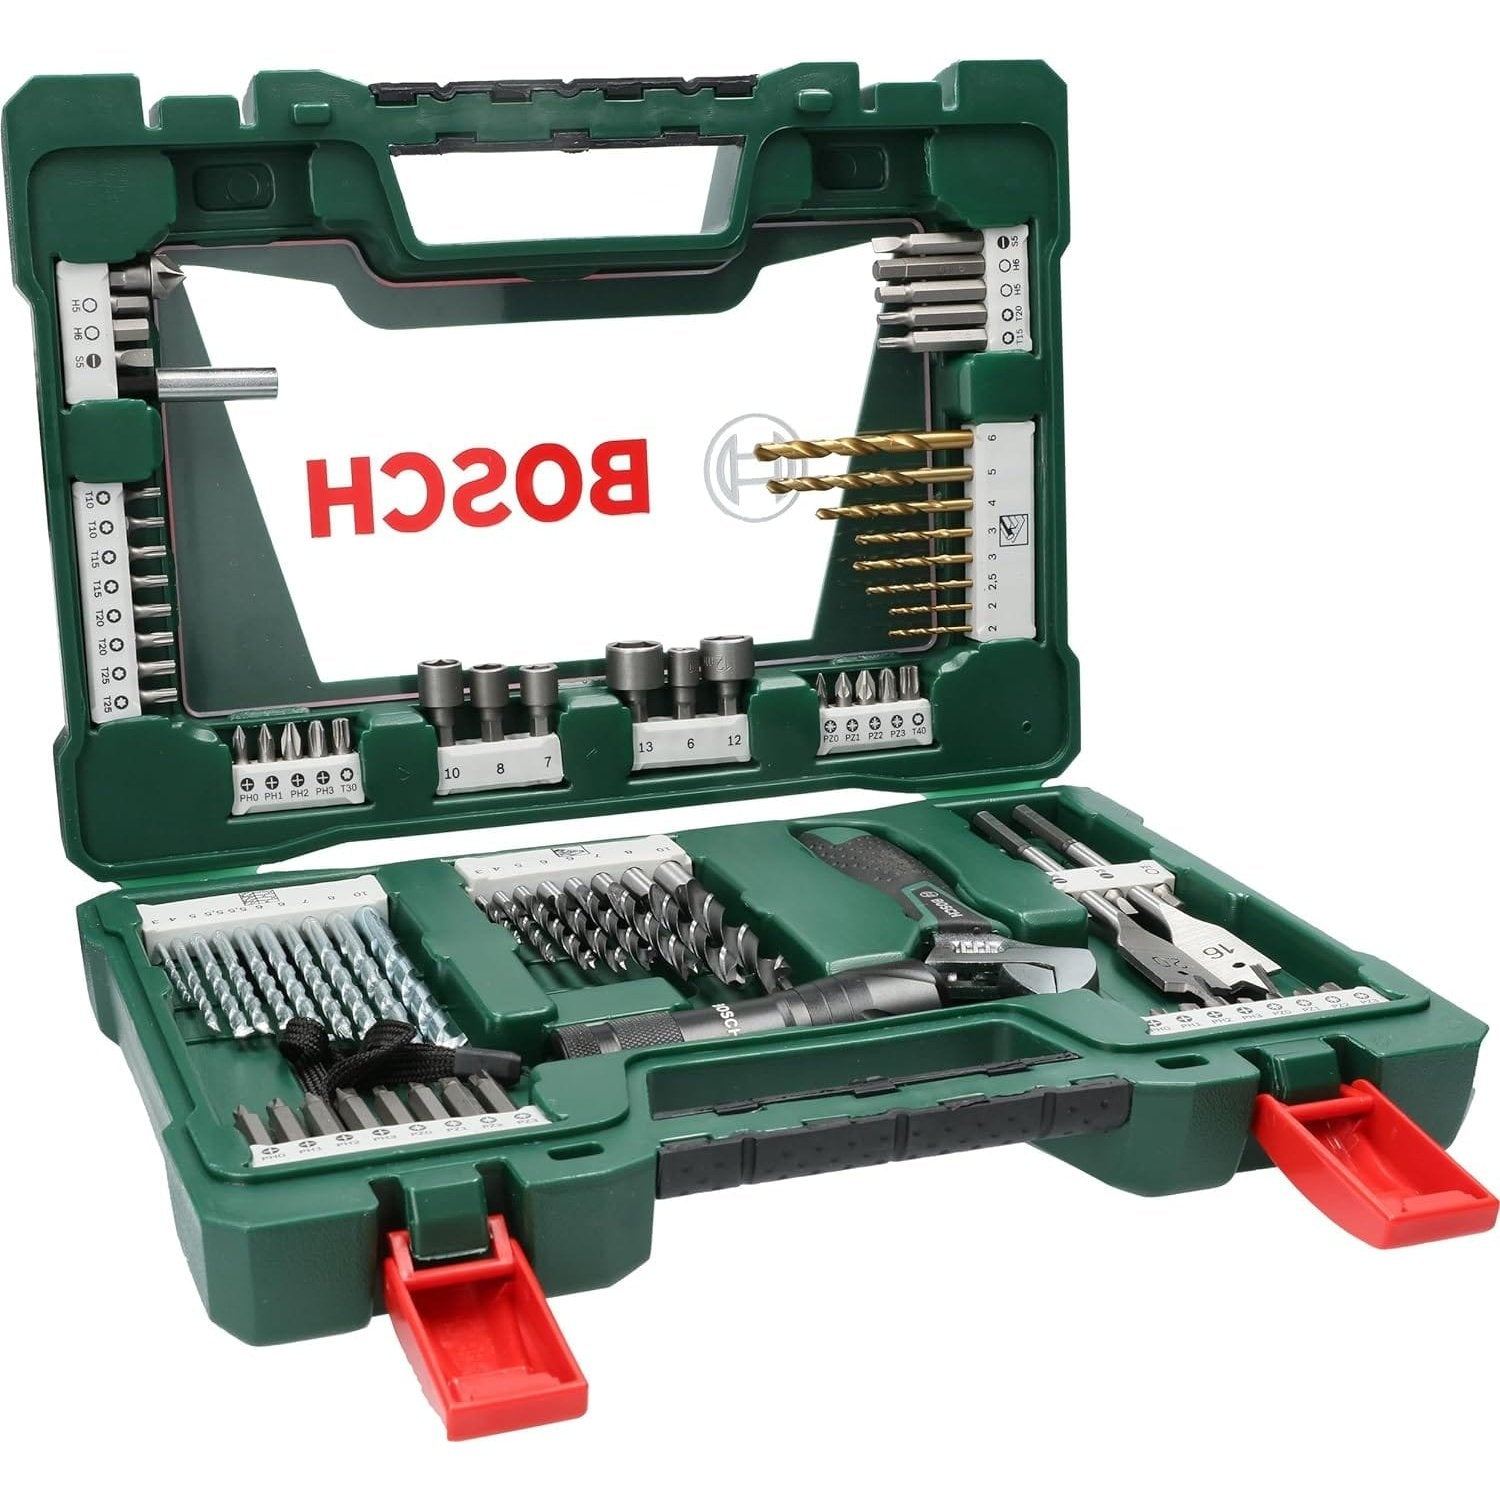 Stanley 6 Pieces Screwdriver Set - 0-65-007 | Supply Master, Accra, Ghana Level Buy Tools hardware Building materials